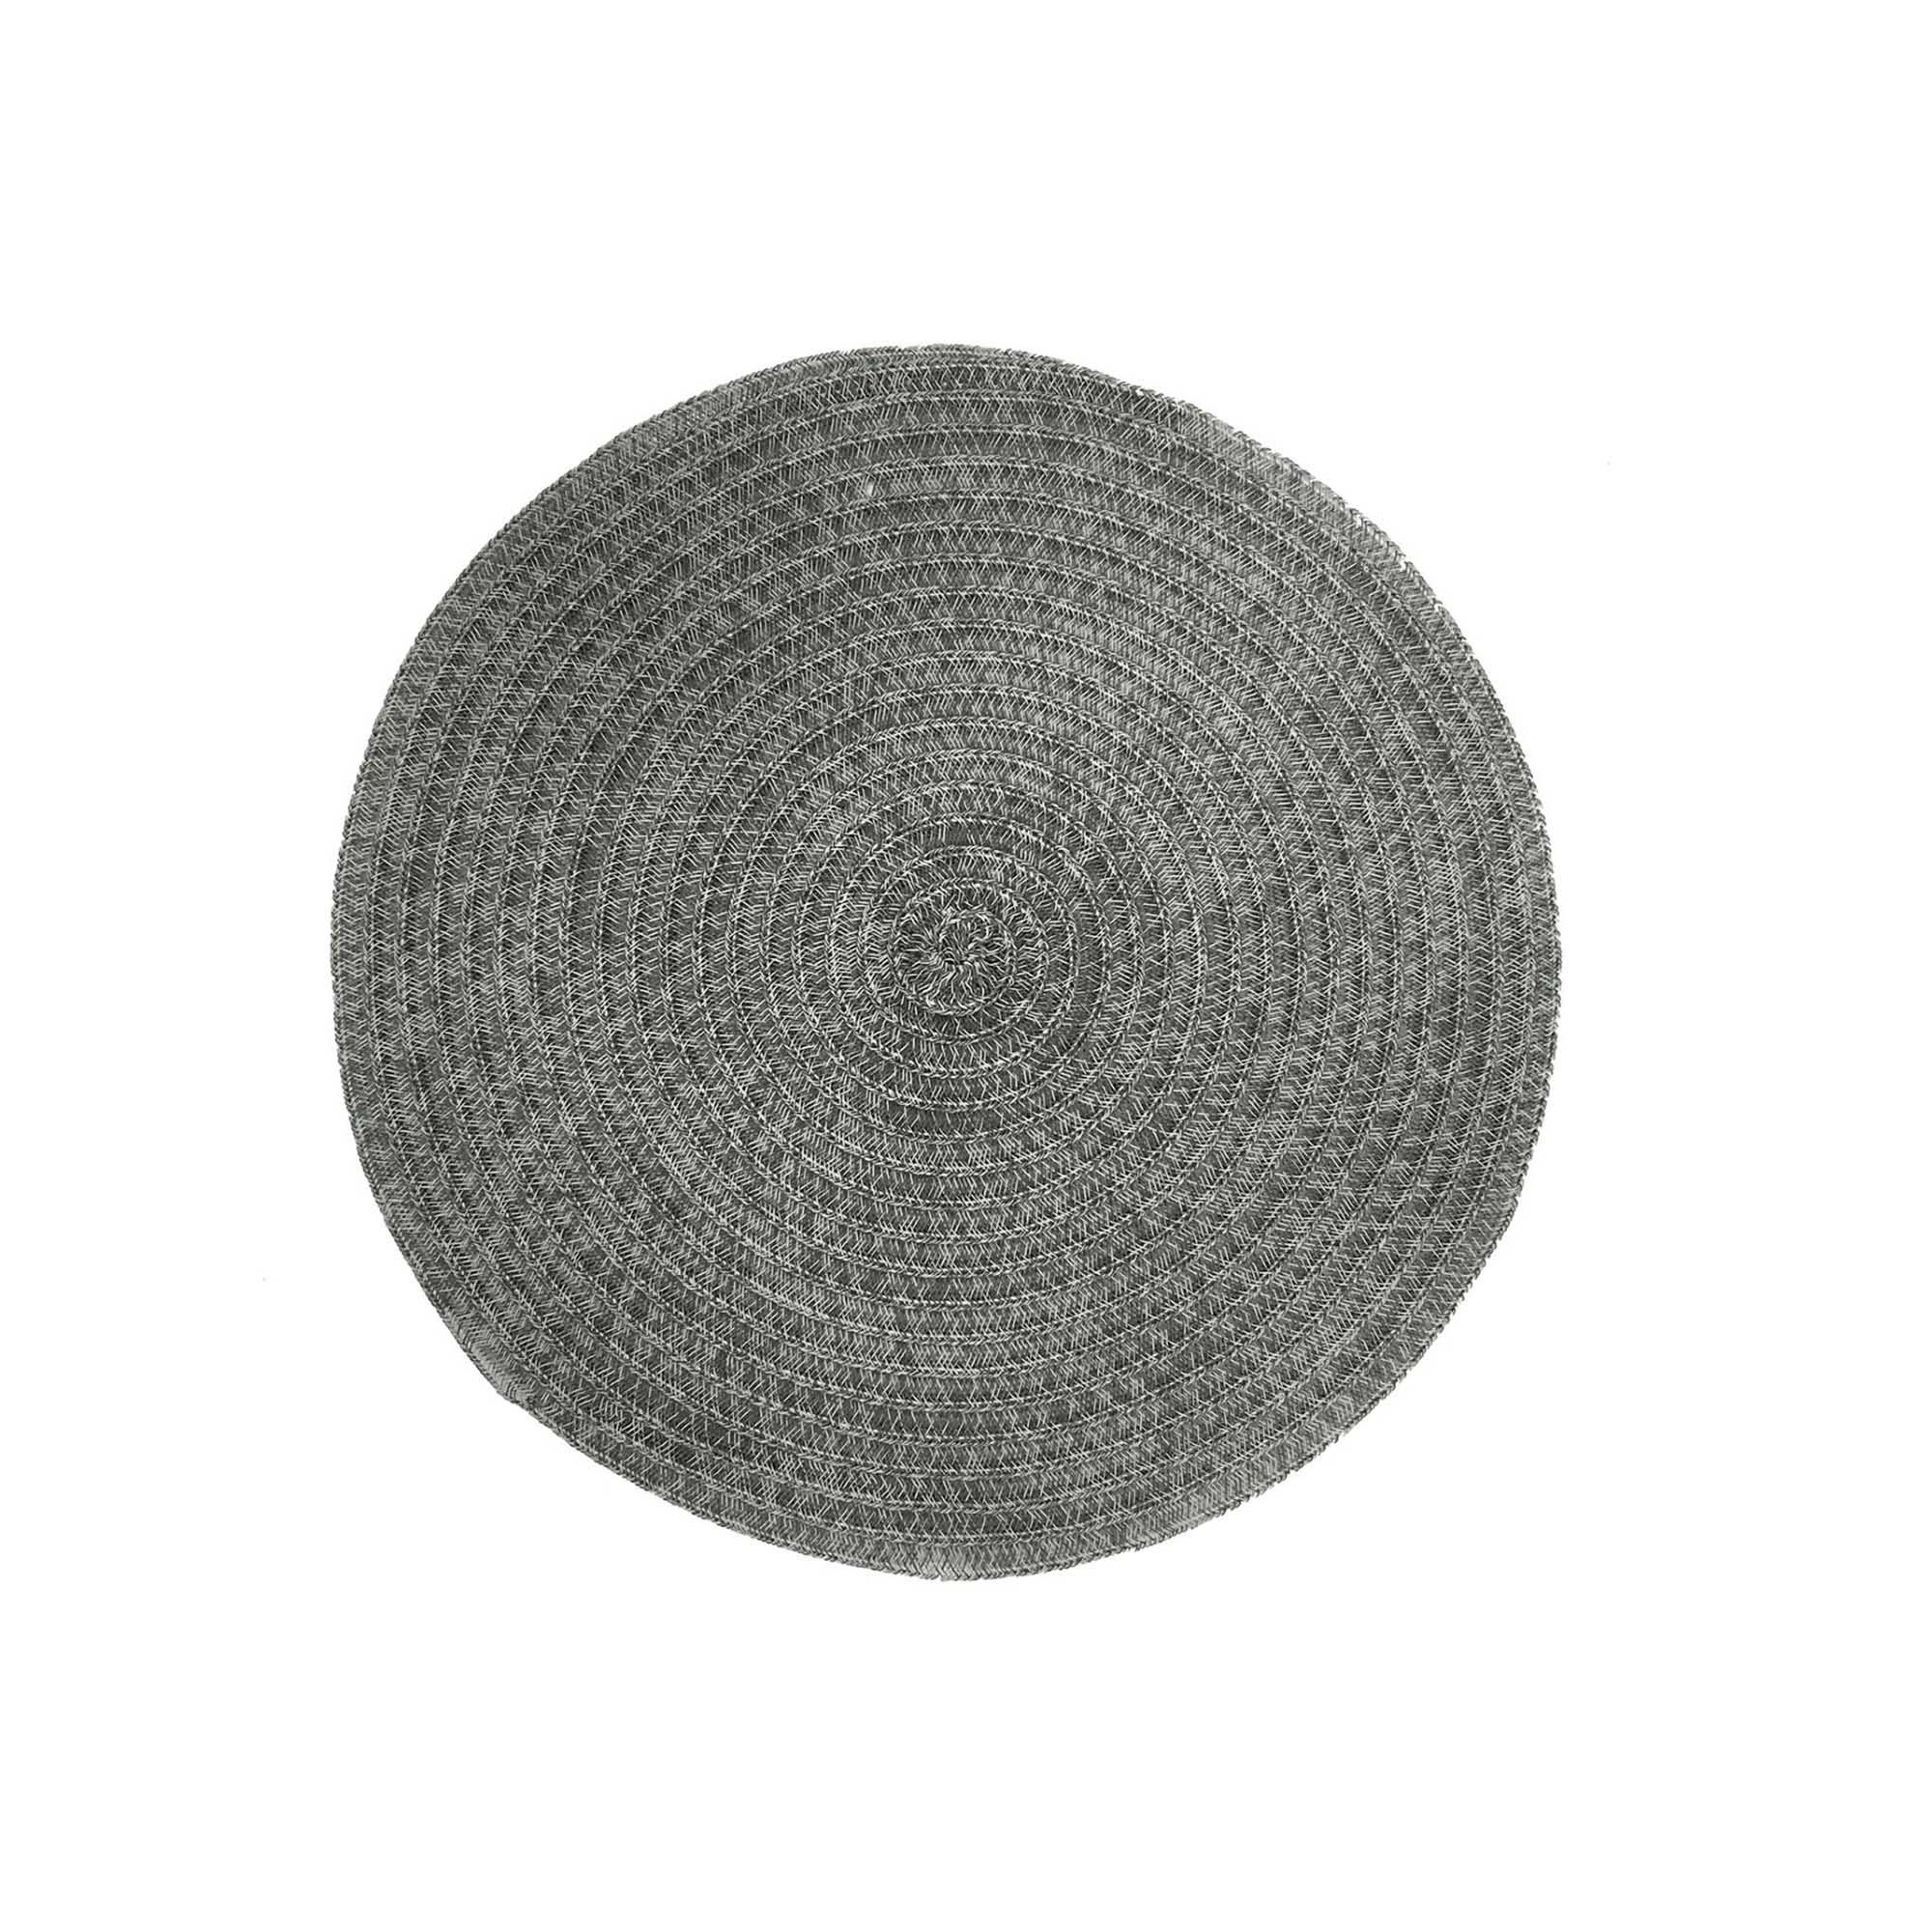 Grey Round Textaline Placemat 15in dia.